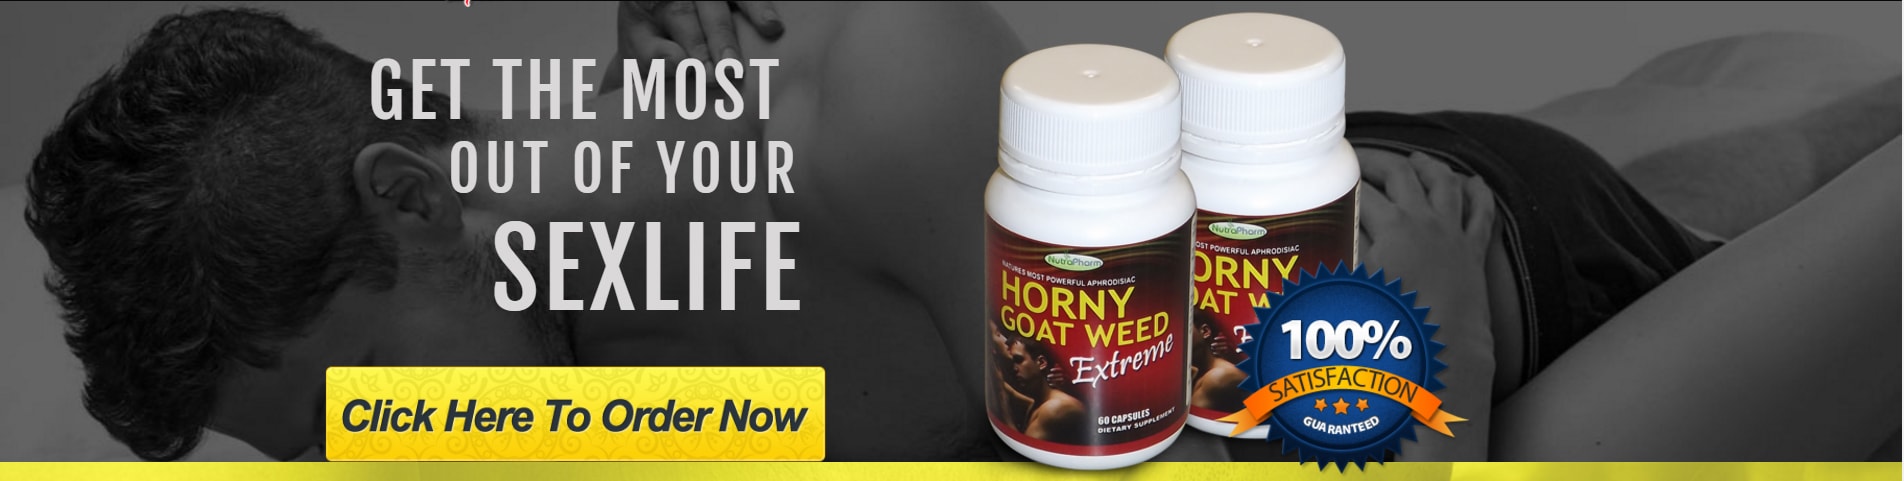 Horny Goatweed Extreme - Natural Powerful Aphrodisiac for Men and Women For Canadian